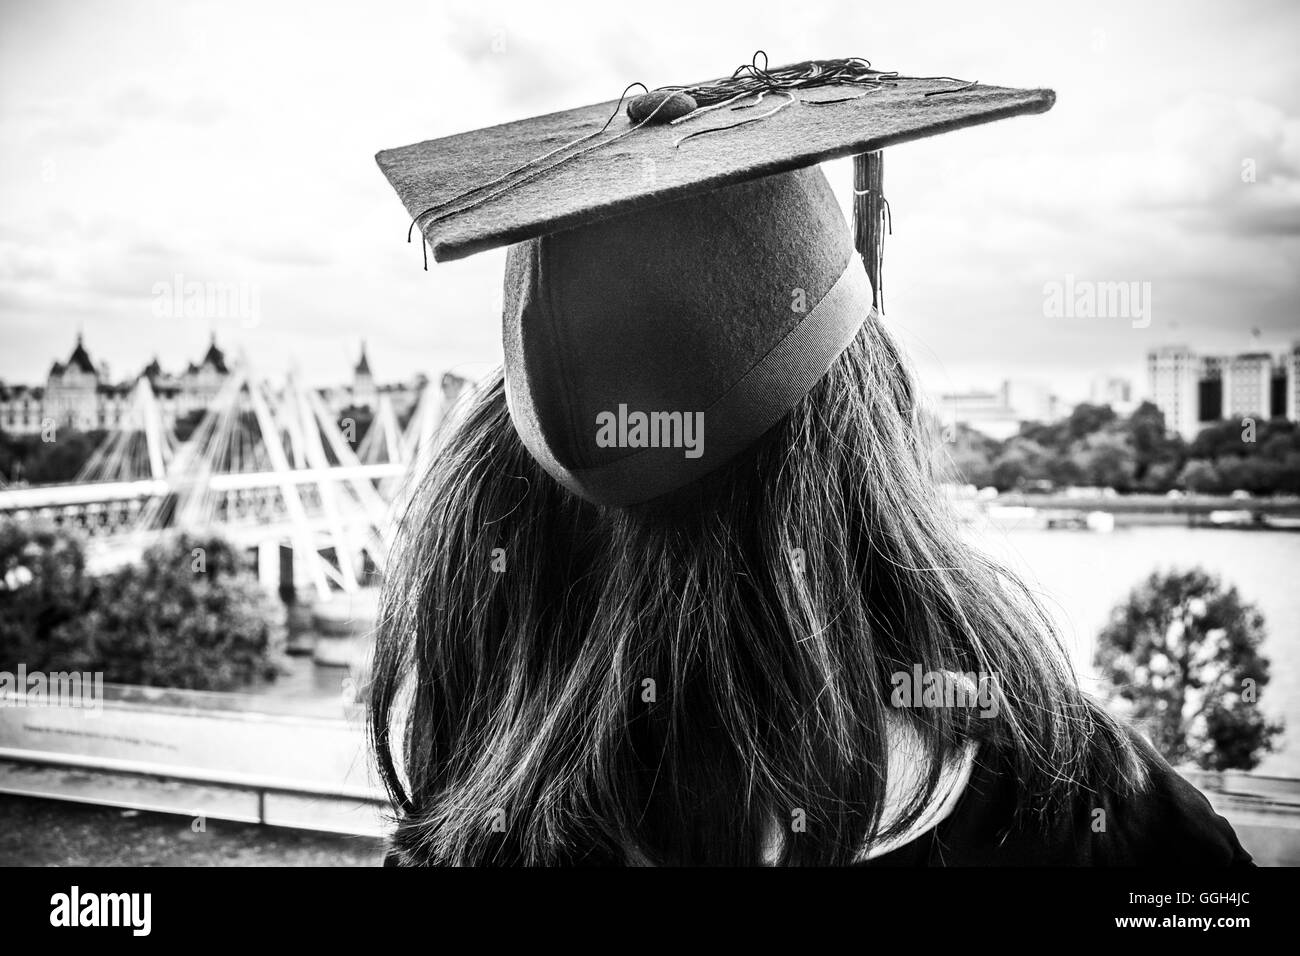 A young graduate wearing a mortarboard look towards future horizons Stock Photo